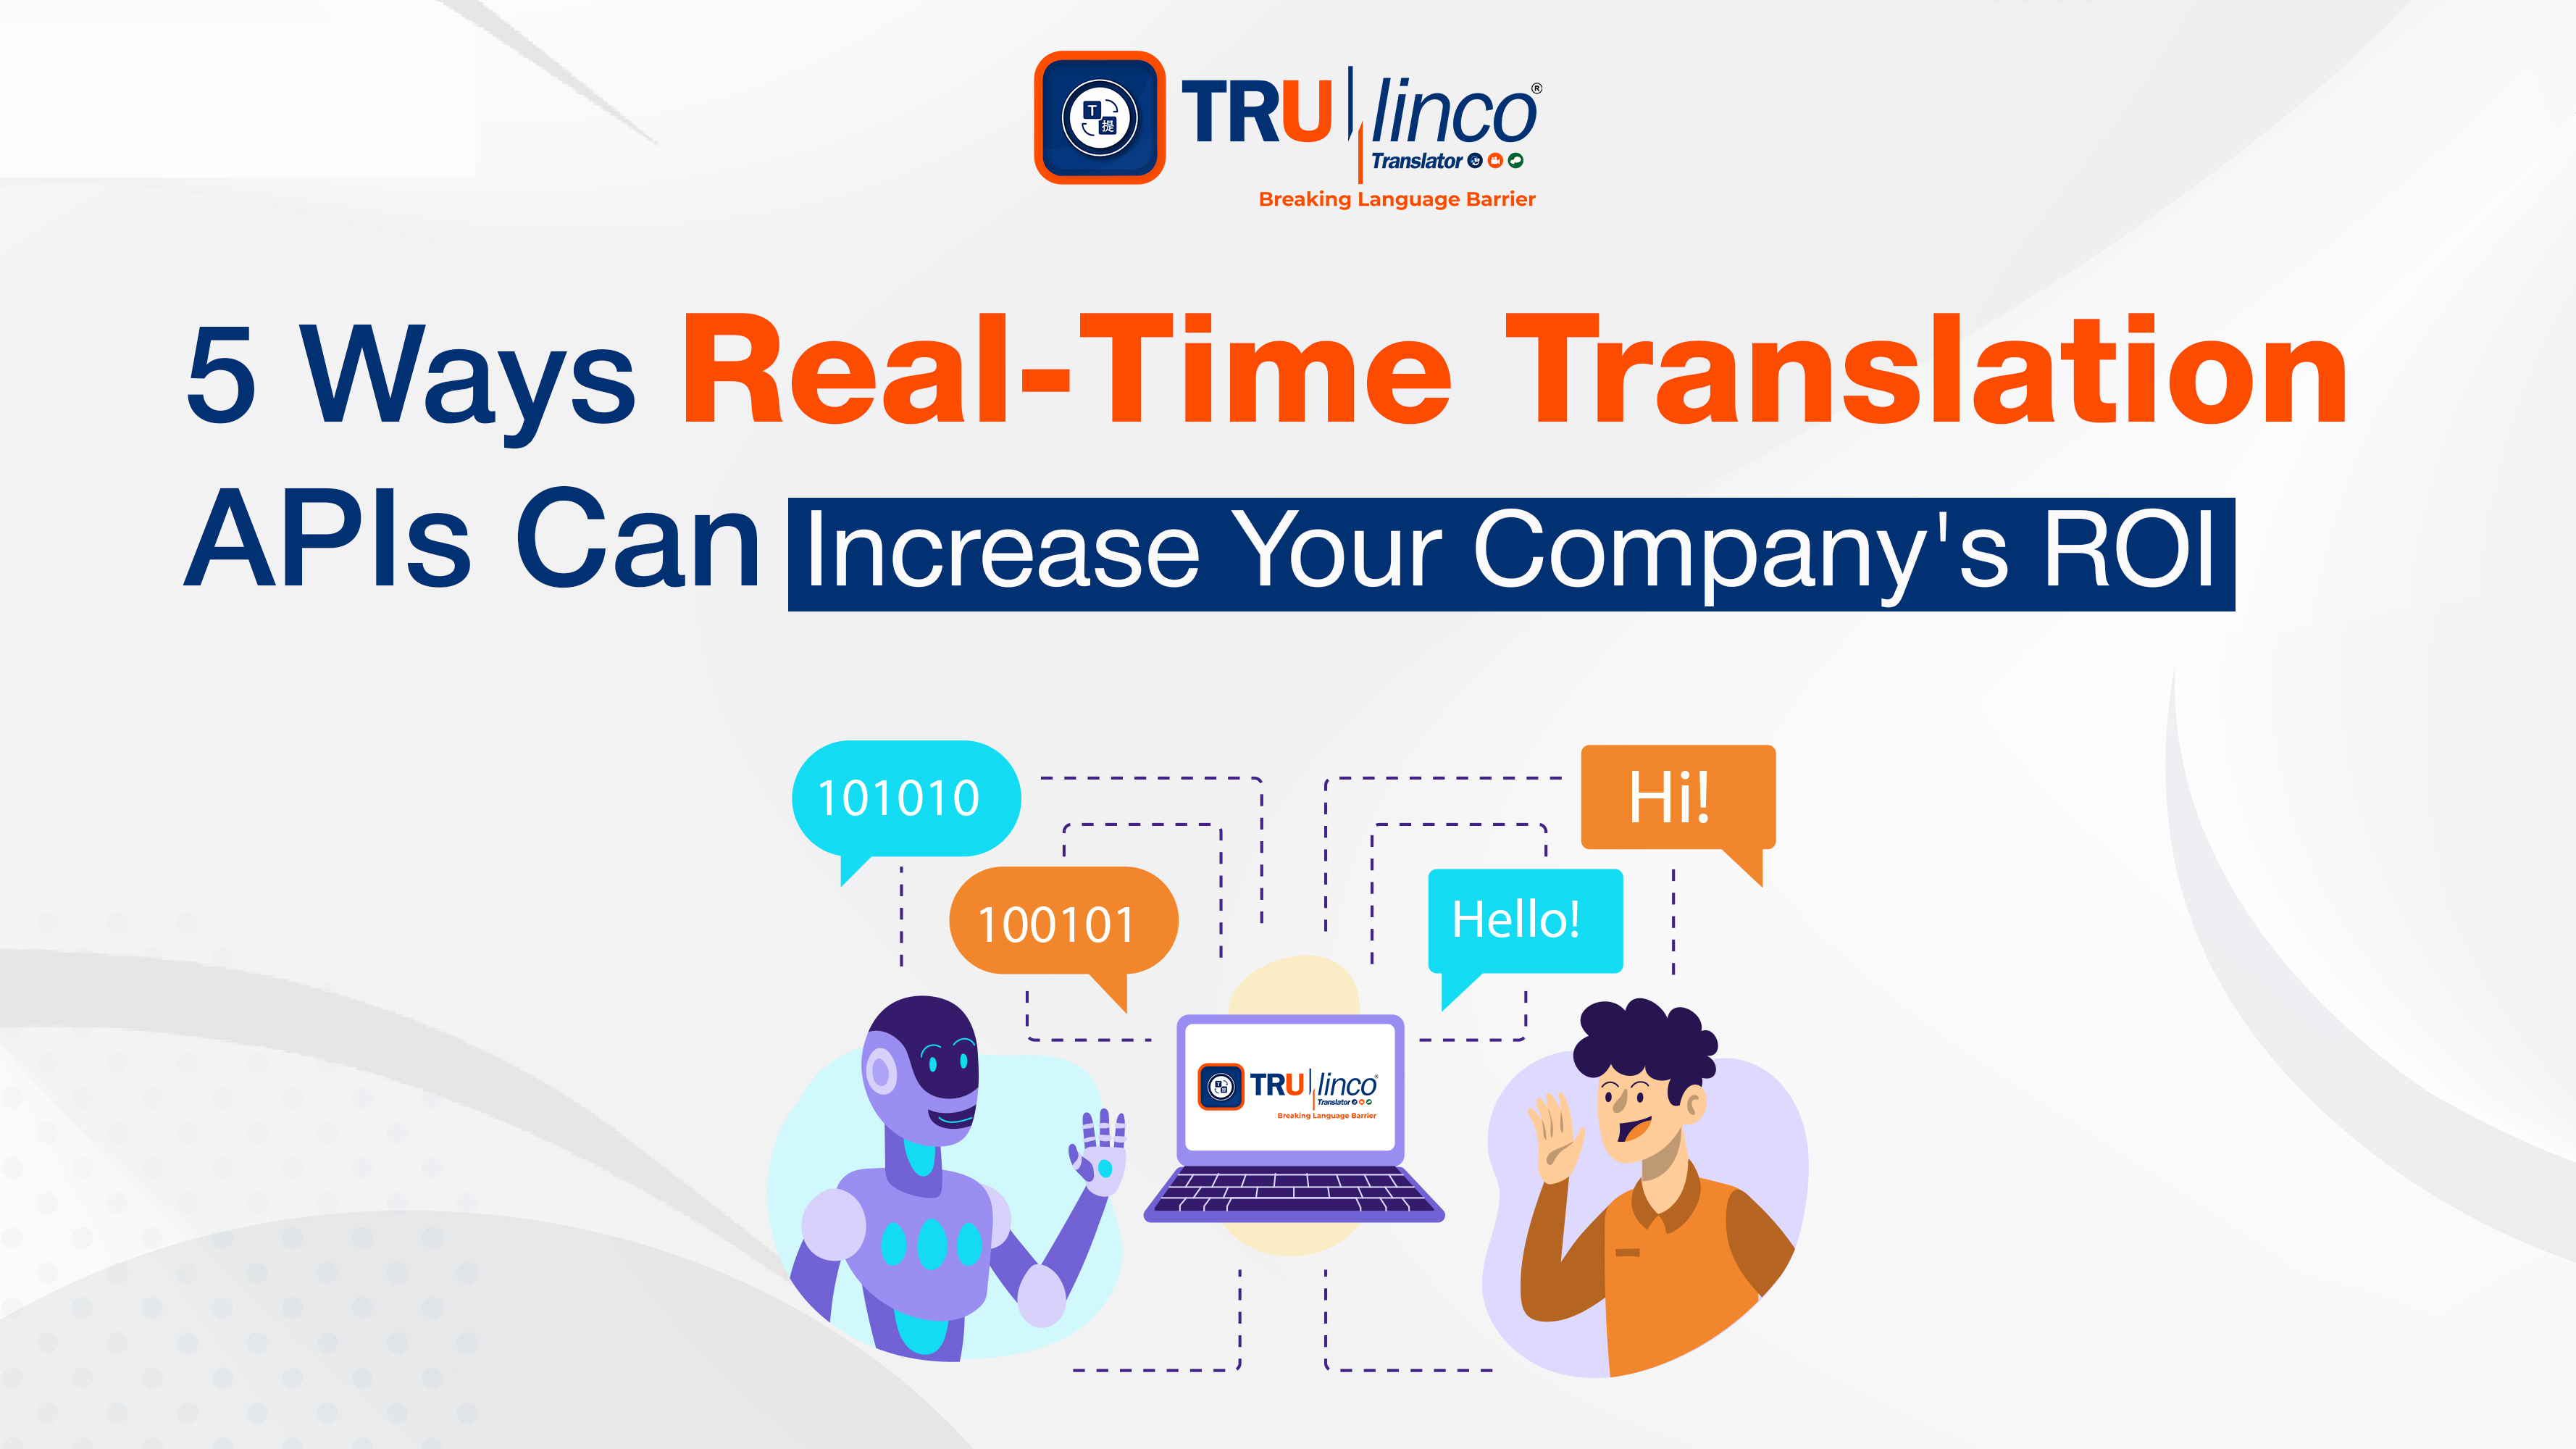 5 Ways Real-Time Translation APIs Can Increase Your Company's ROI